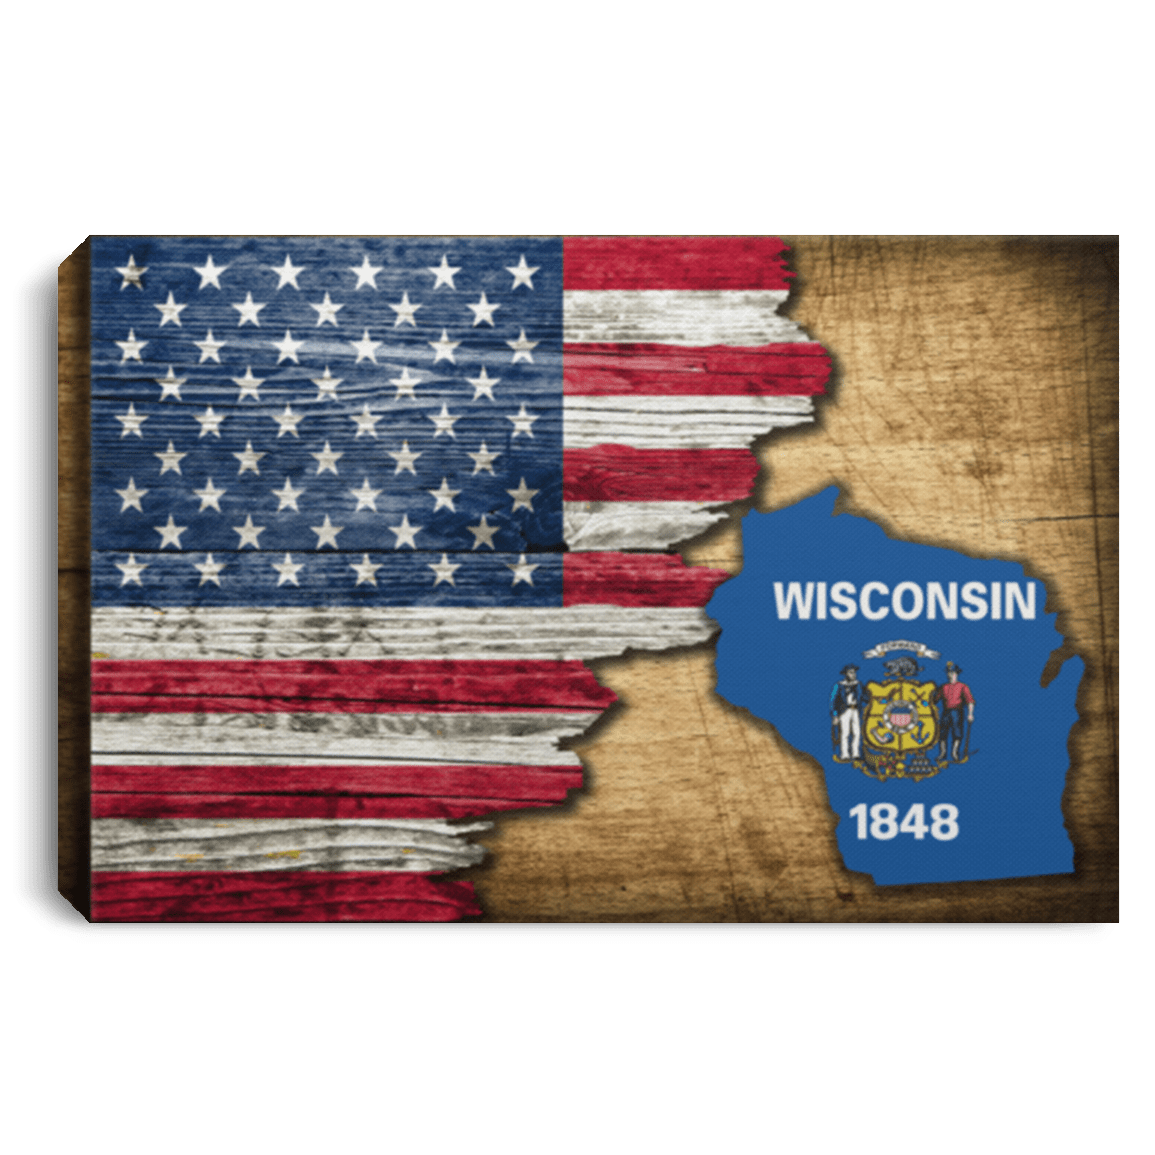 United States/Wisconsin Flag Ripped Effect 12X8 Inches Landscape Canvas .75In Frame